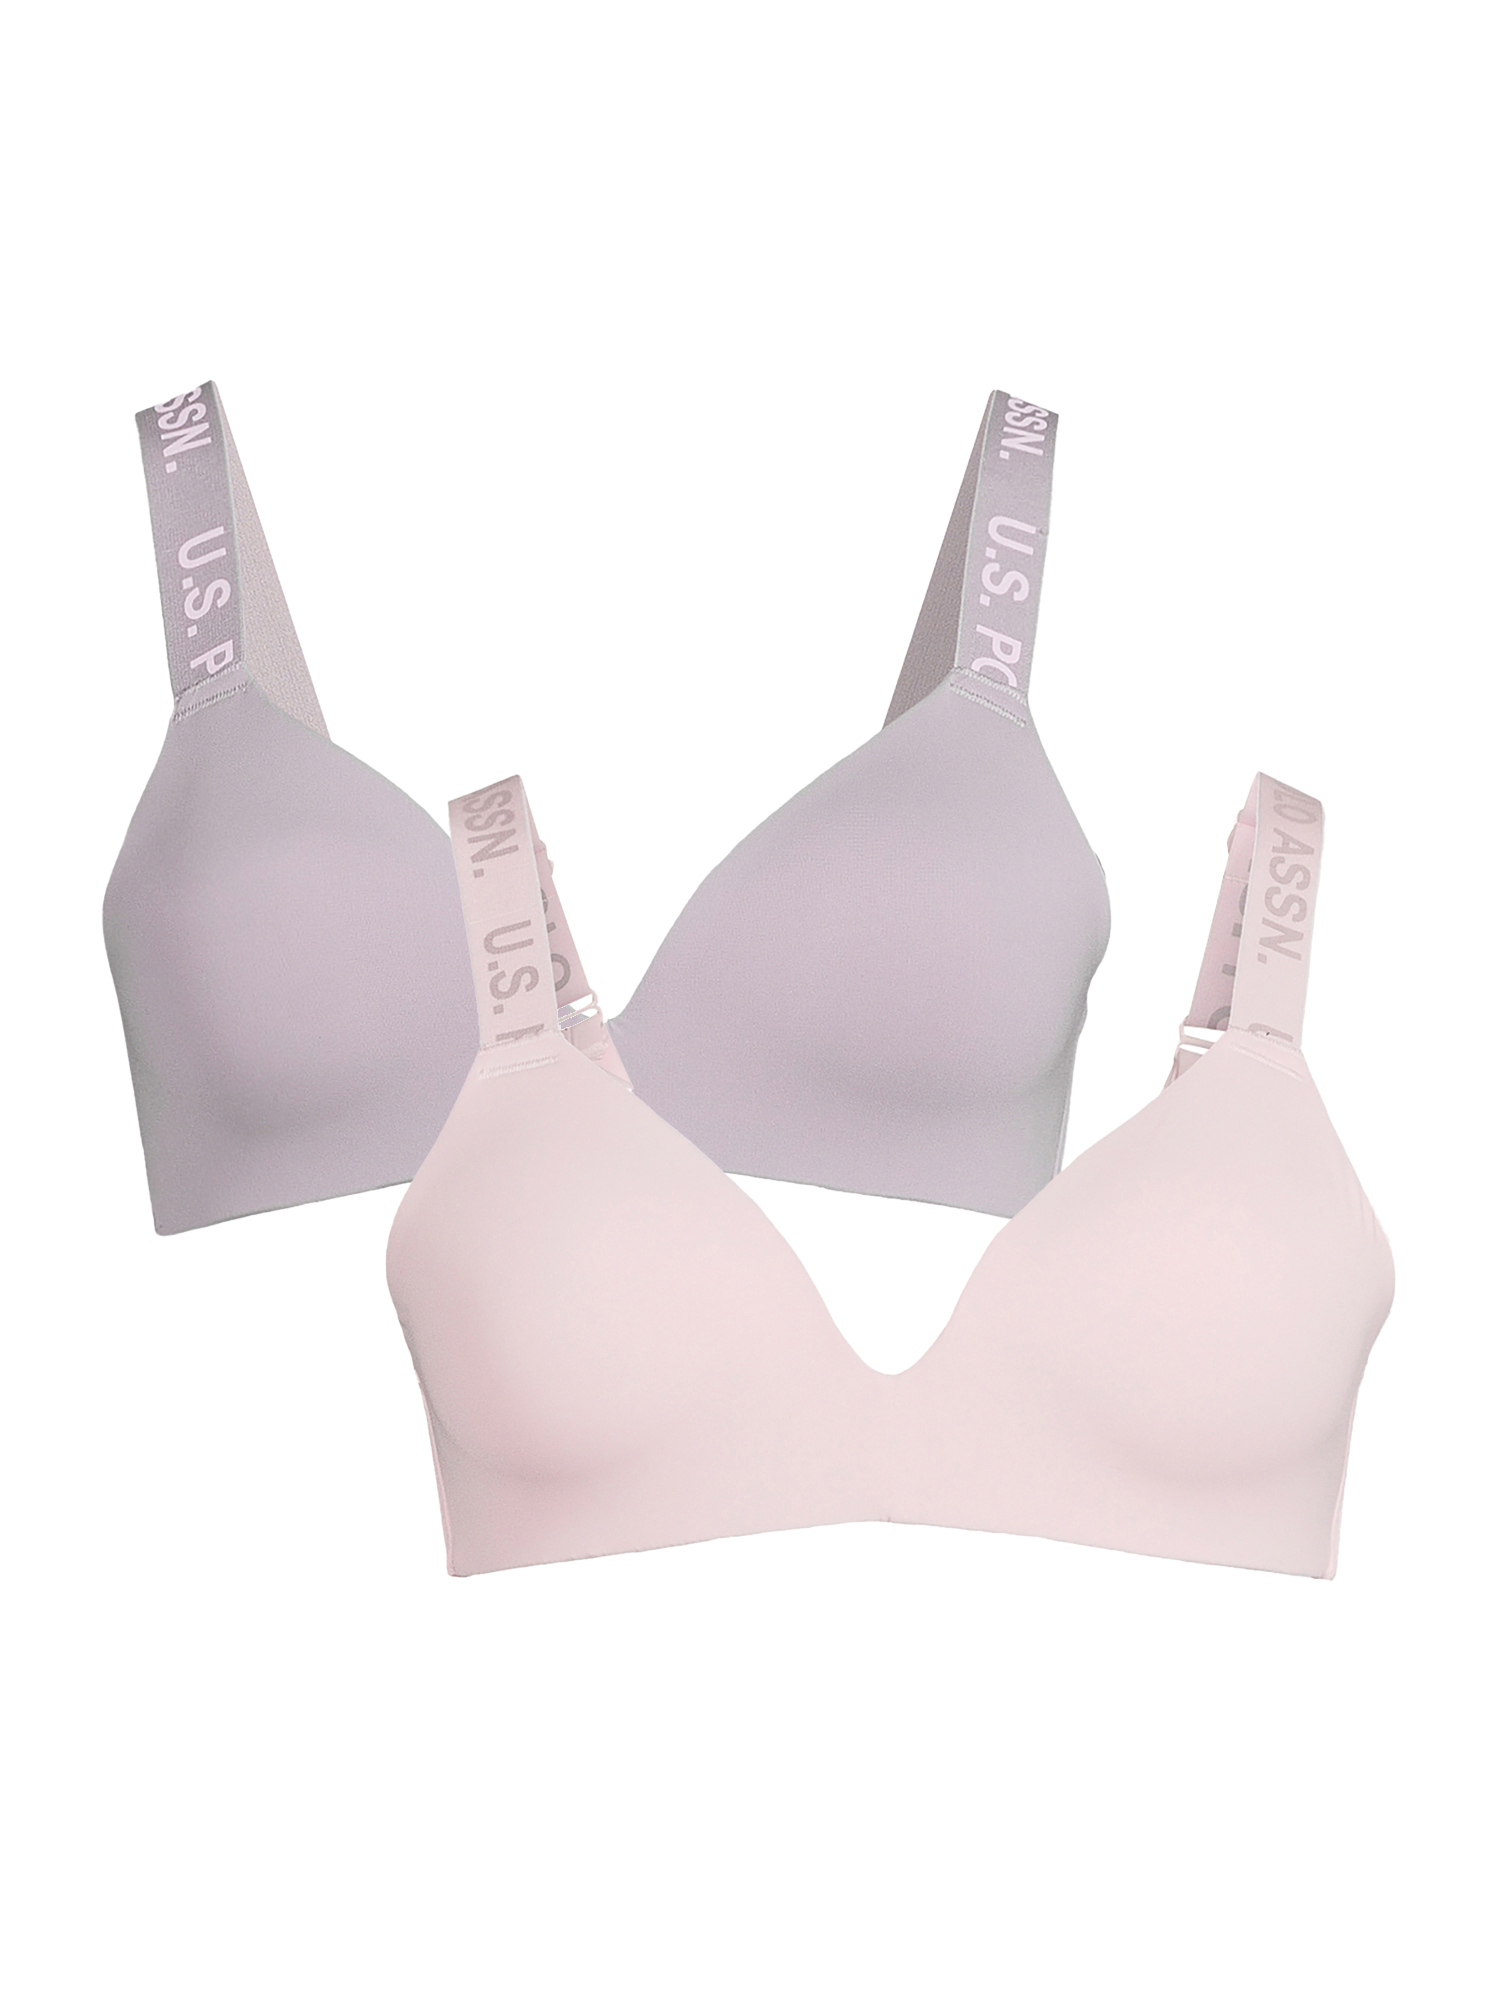 U.S. Polo Assn. Women's Wirefree Push Up Bra, 2-Pack - image 1 of 4